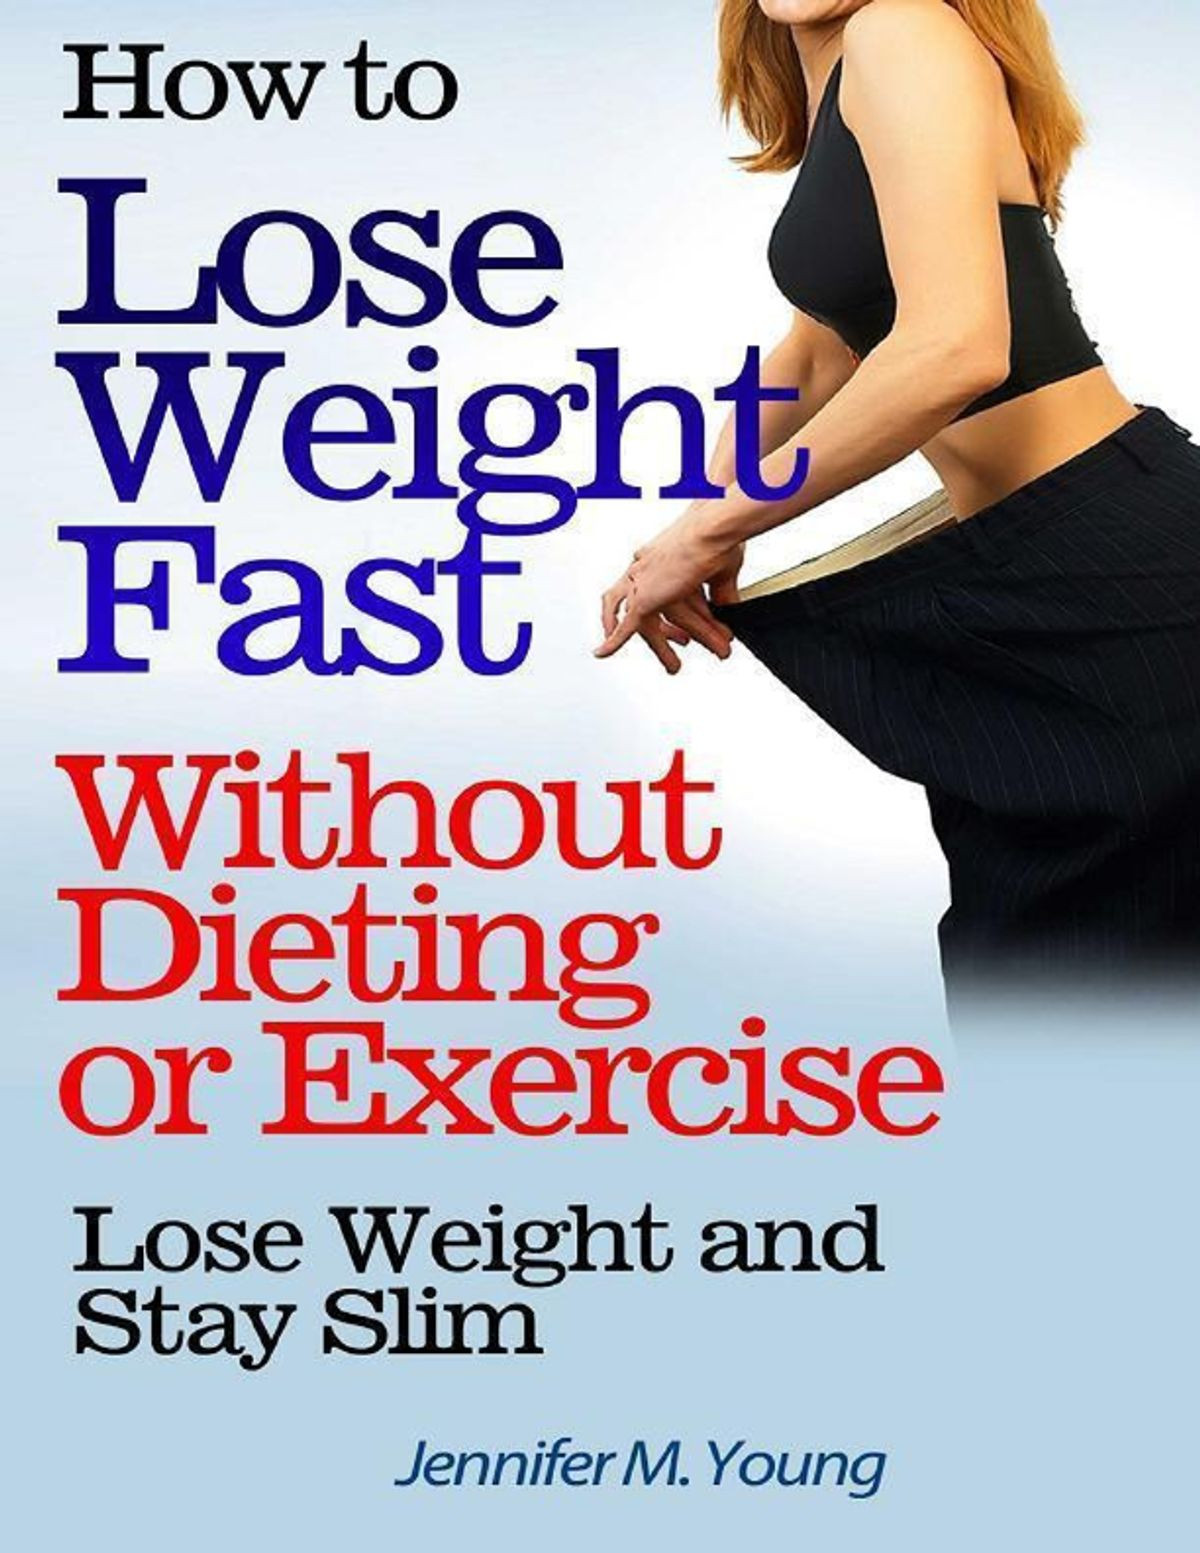 How To Lose Weight Quickly
 How to Lose Weight Fast Without Dieting or Exercise Lose